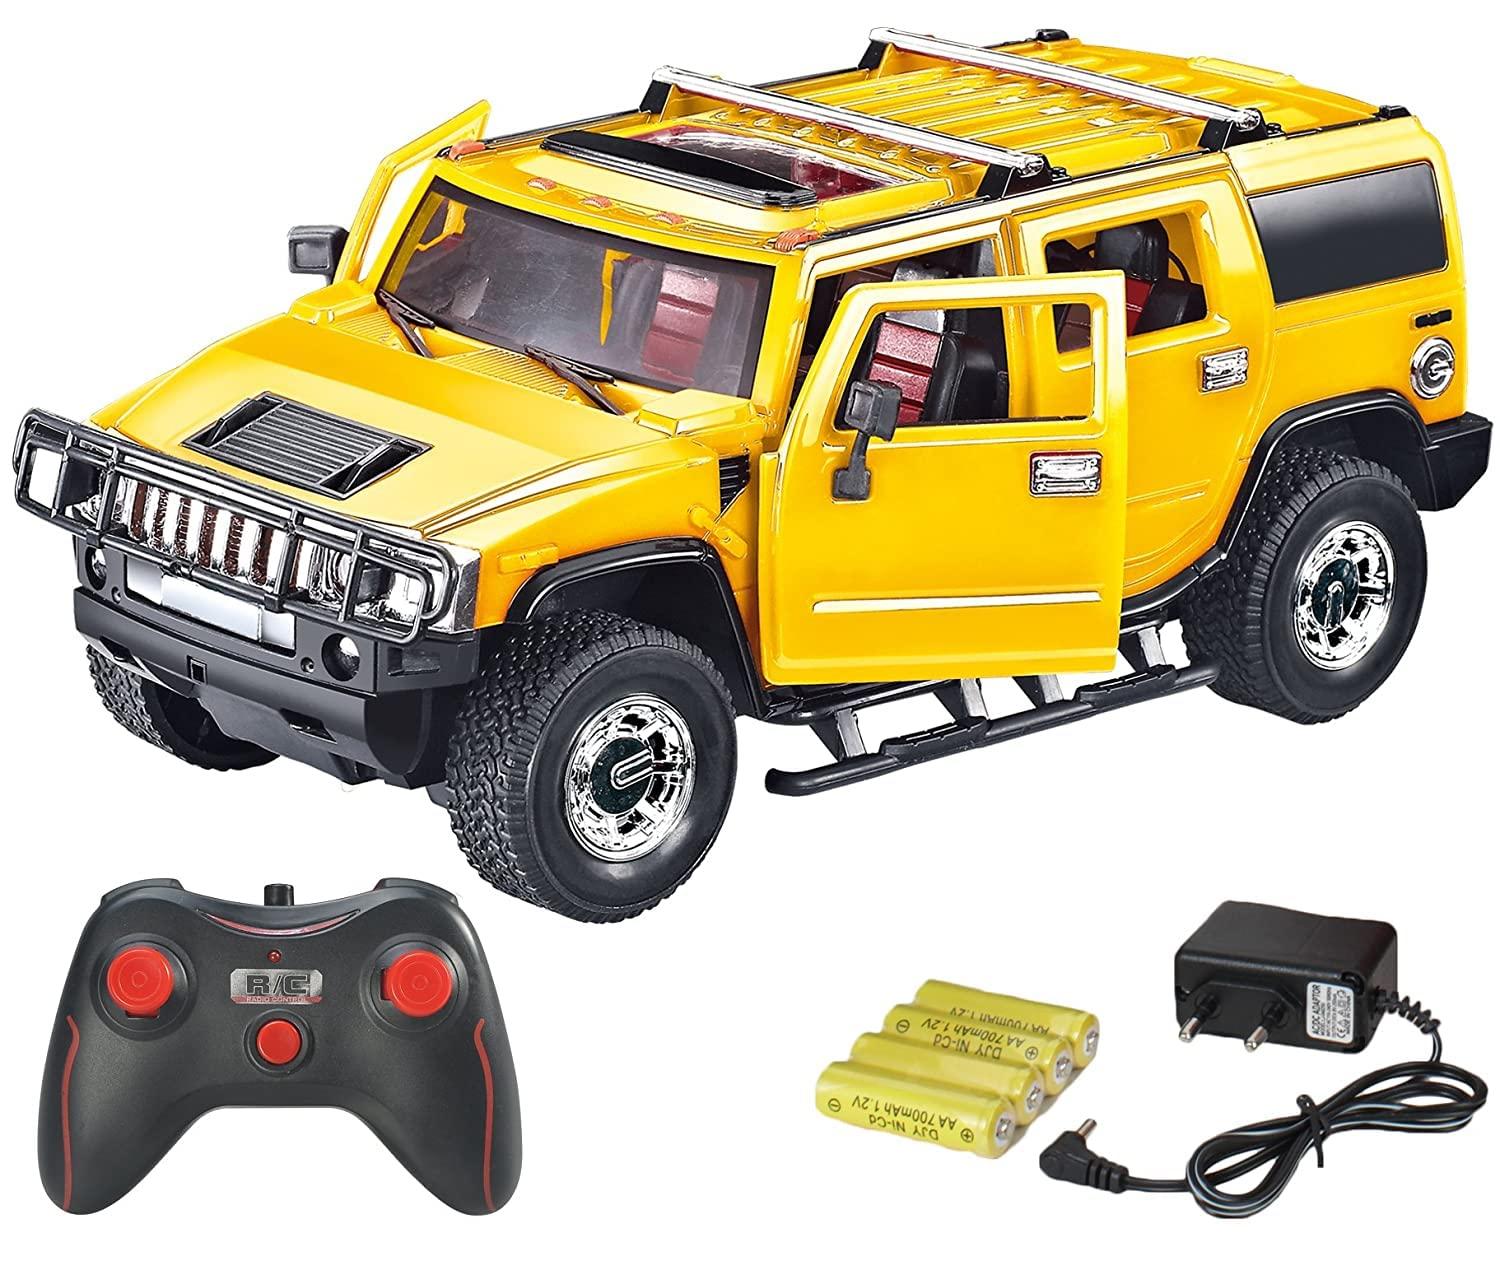 Rc Hummer H2: Upgrade Your RC Hummer H2: Customization and Performance Enhancements